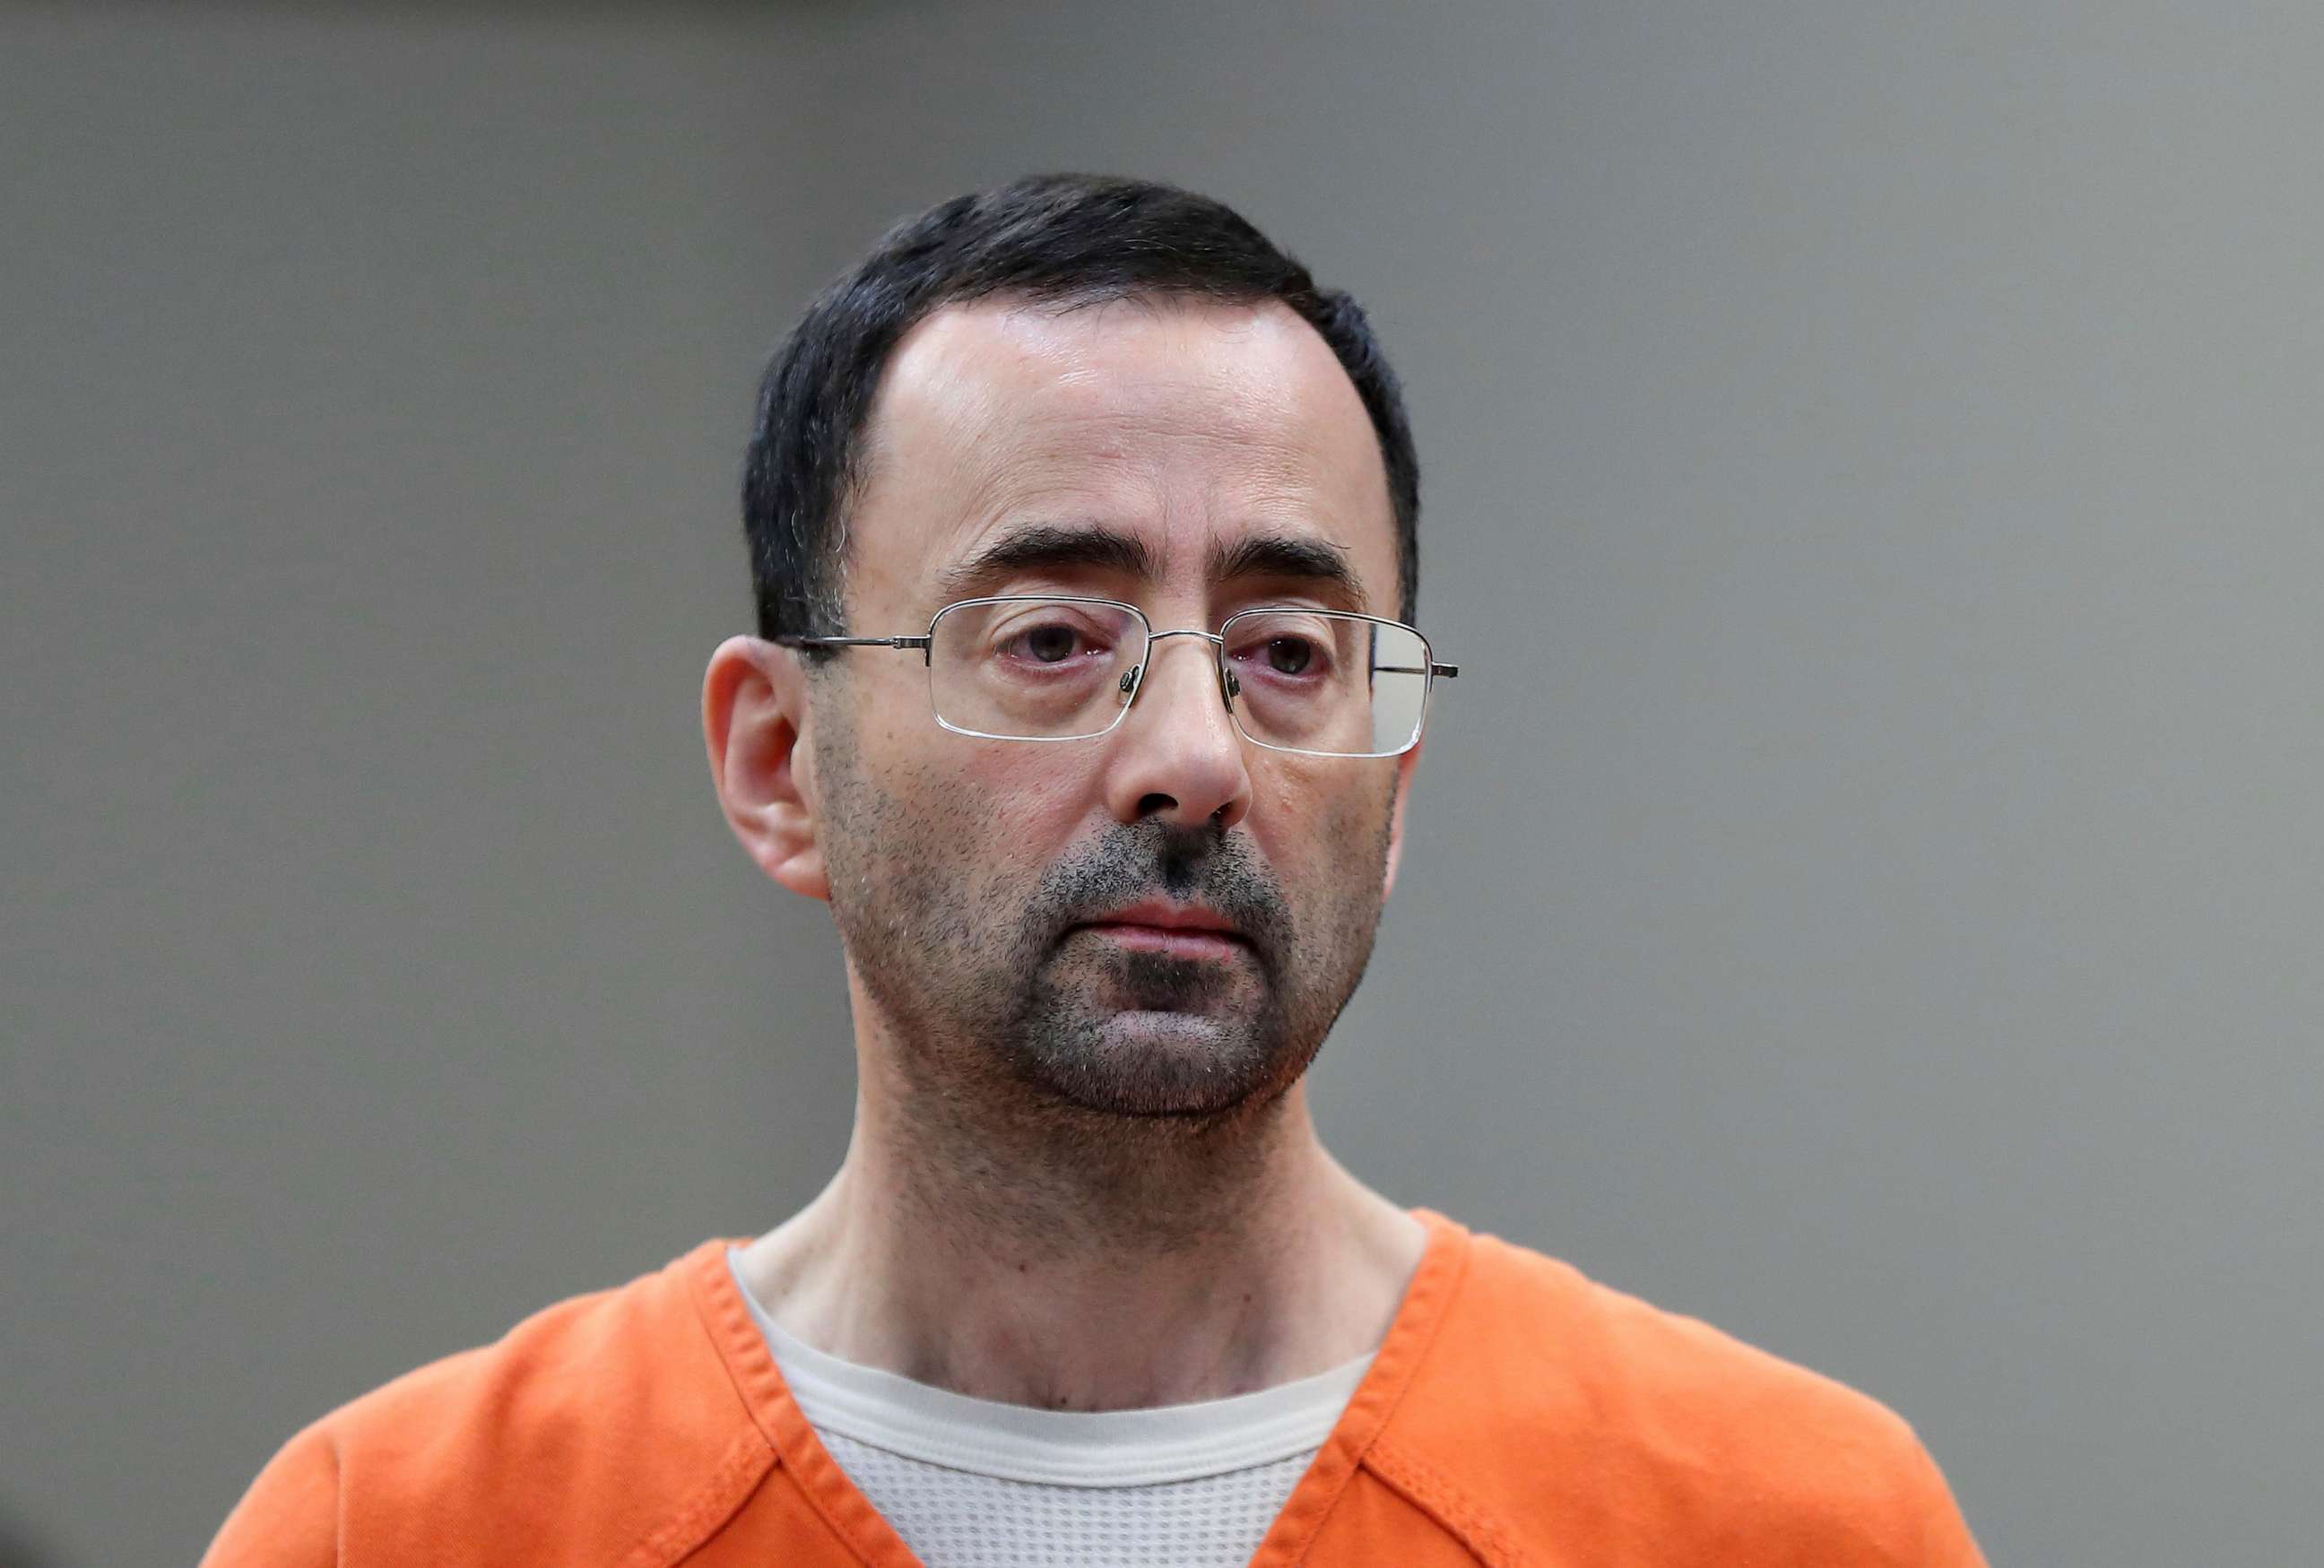 PHOTO: In this Nov. 22, 2017 file photo, Dr. Larry Nassar appears in court for a plea hearing in Lansing, Mich.